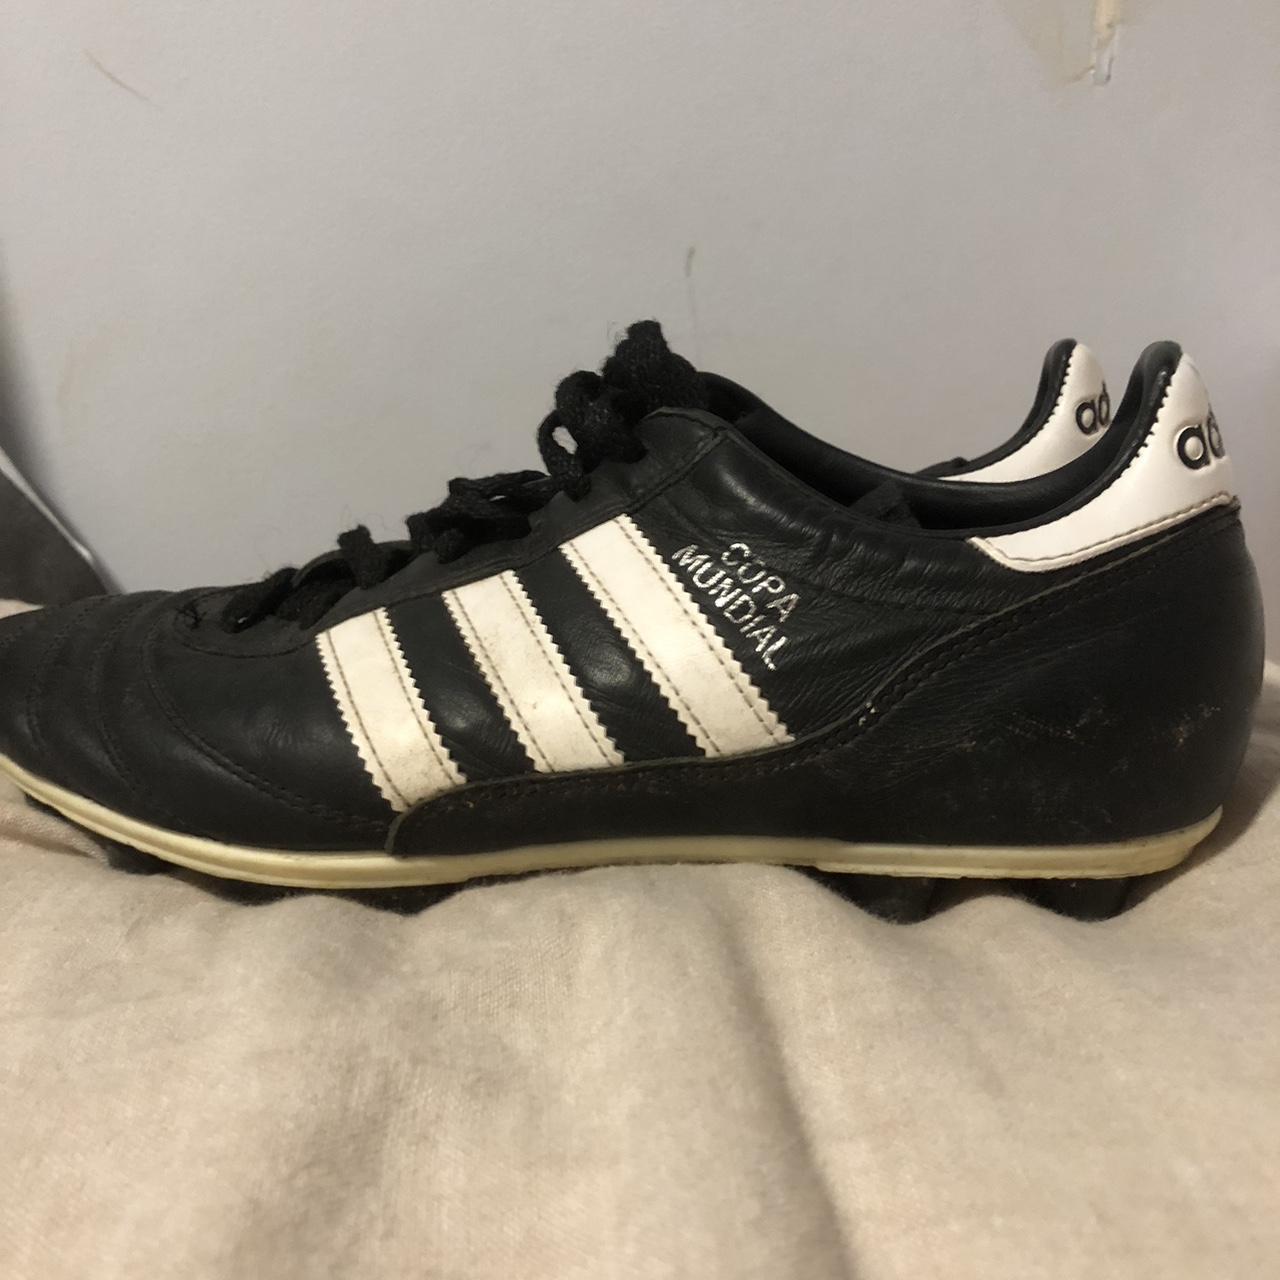 Adidas Men's Black and White Boots | Depop